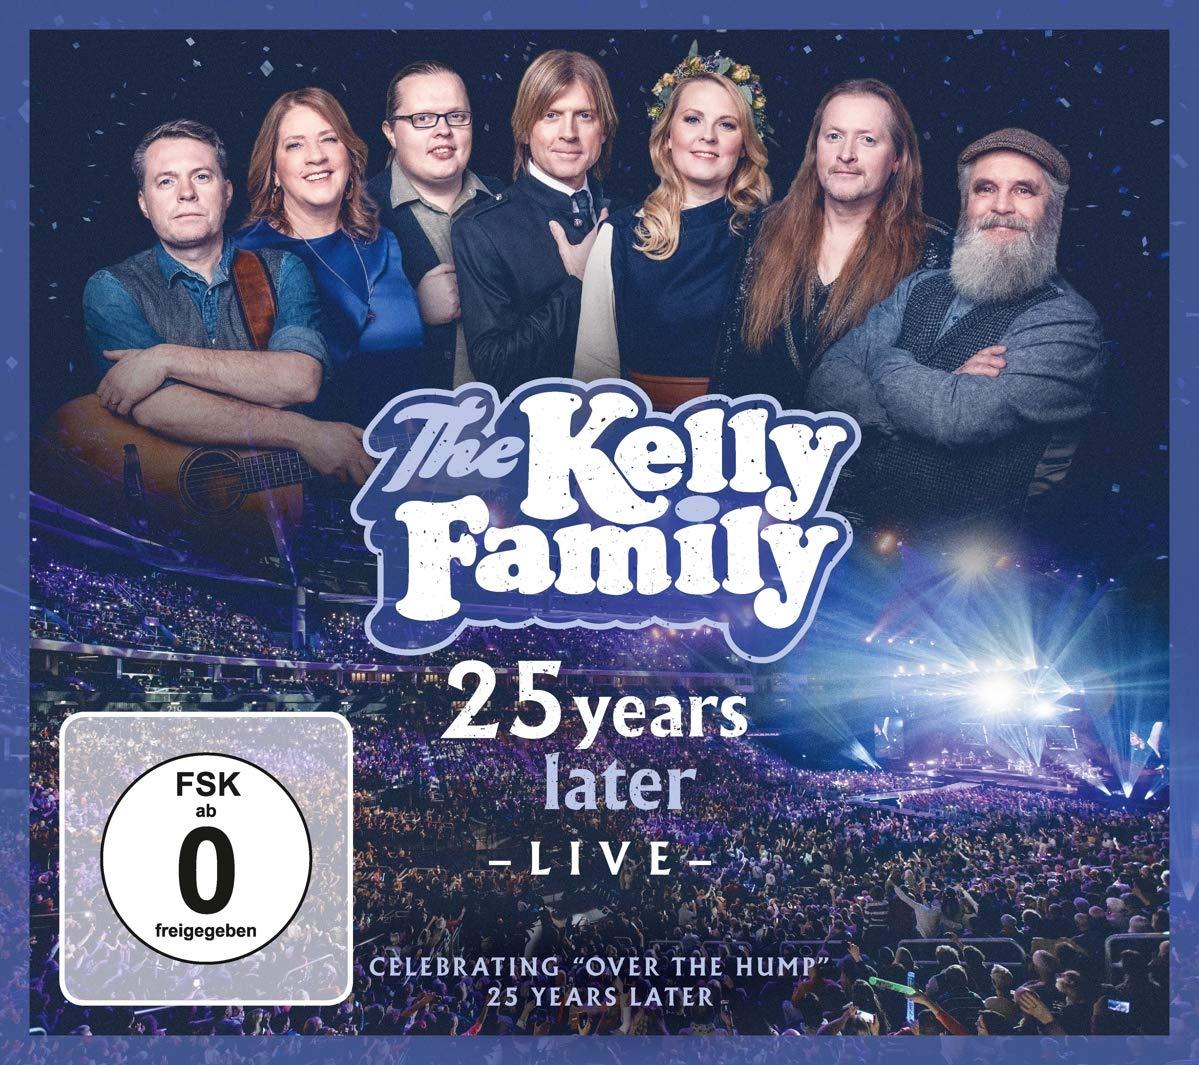 Kelly Family, The - 25 years later LIVE 2CD+2DVD